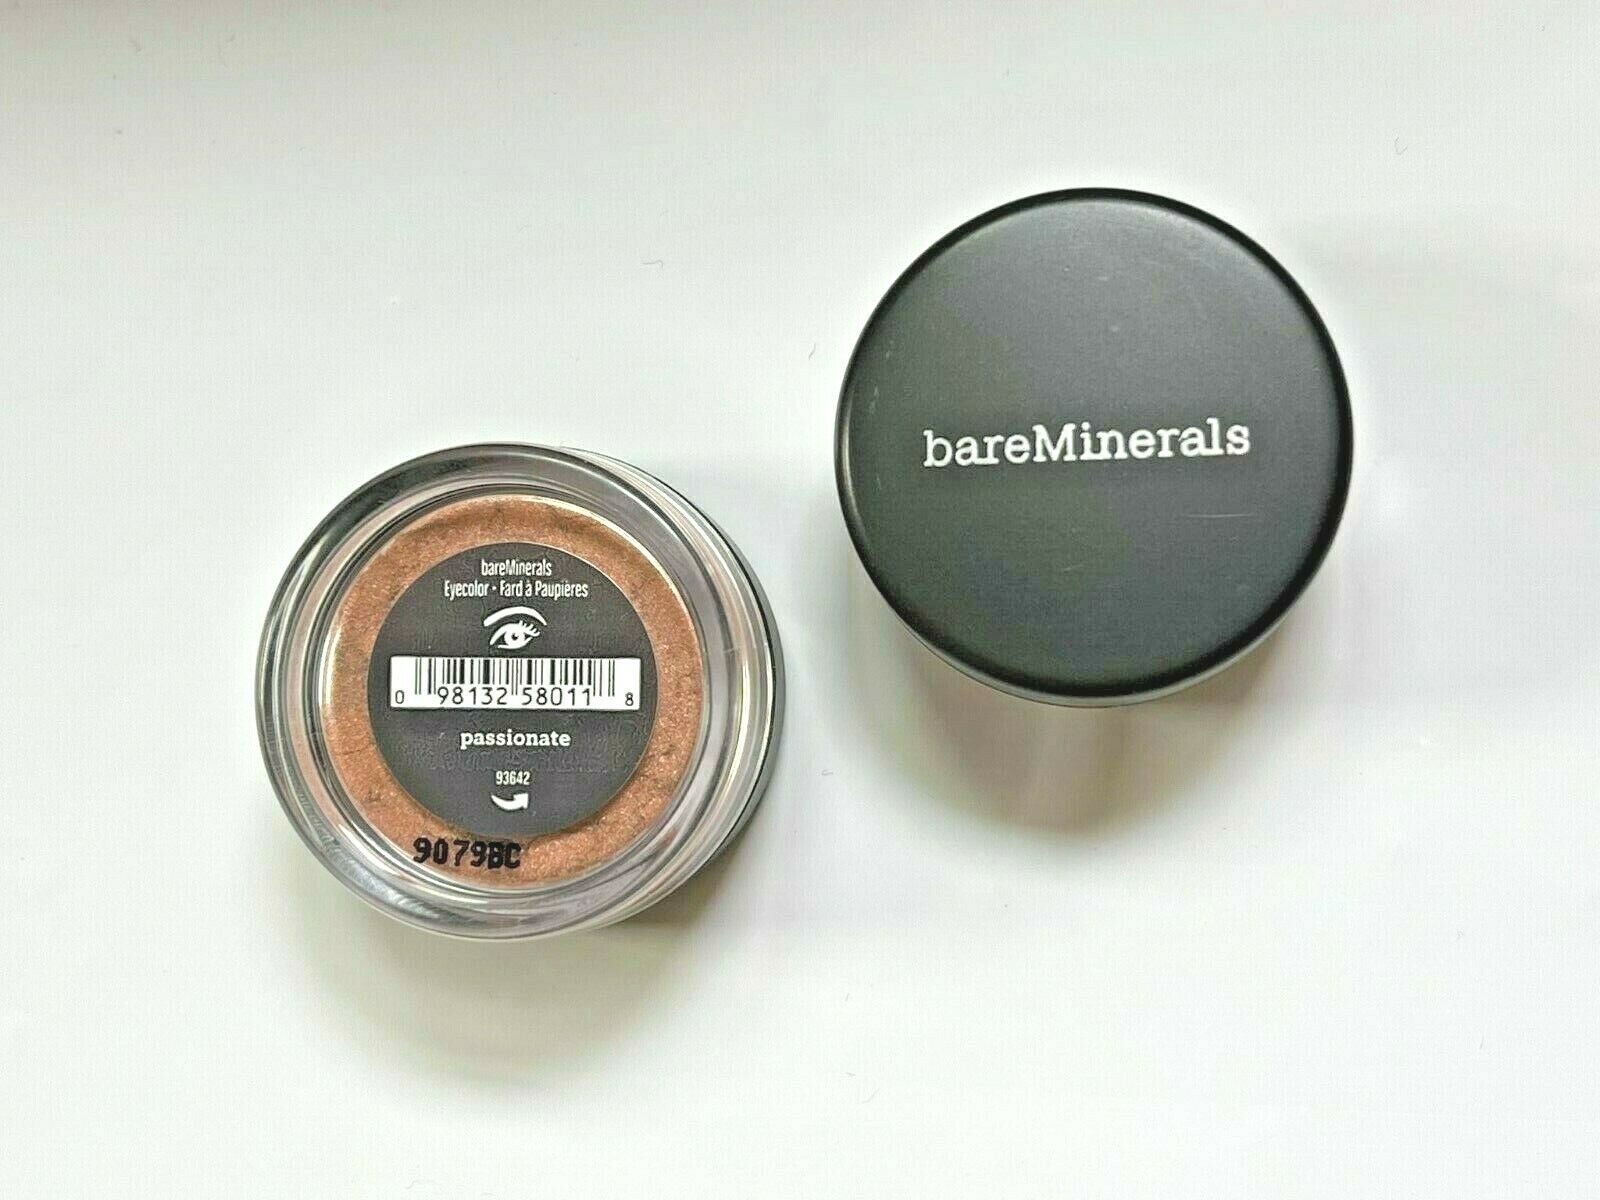 Primary image for BAREMINERALS Loose Eyecolor - PASSIONATE - 0.02 oz